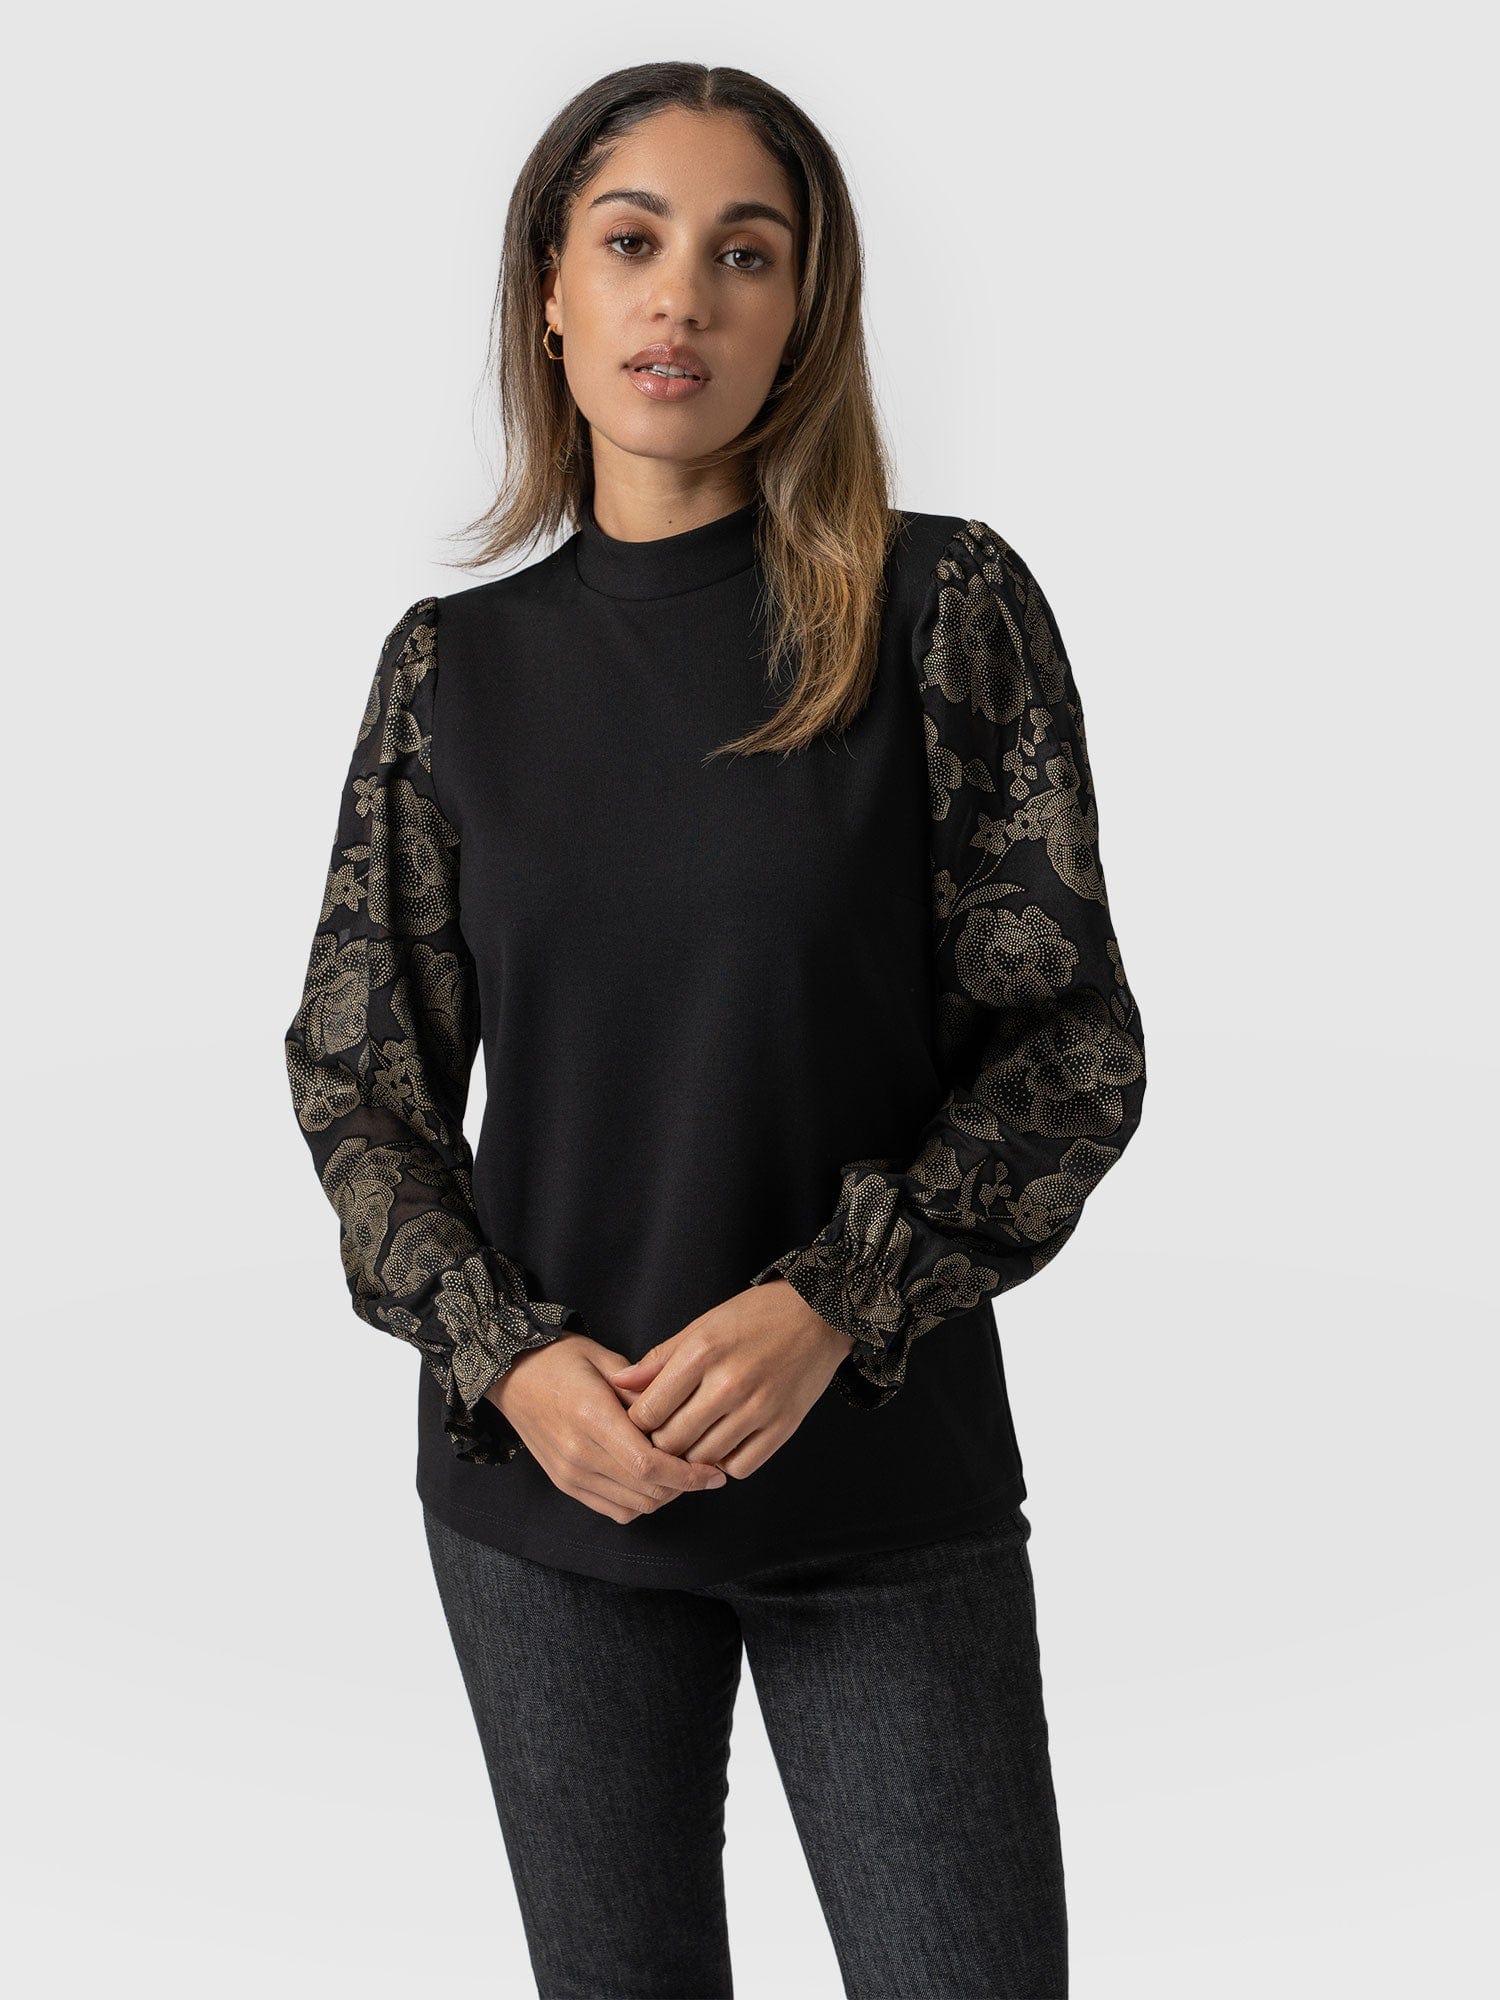 Penny Puff Sleeve Long Sleeve Top Black & Gold Floral Burnout - Women's ...